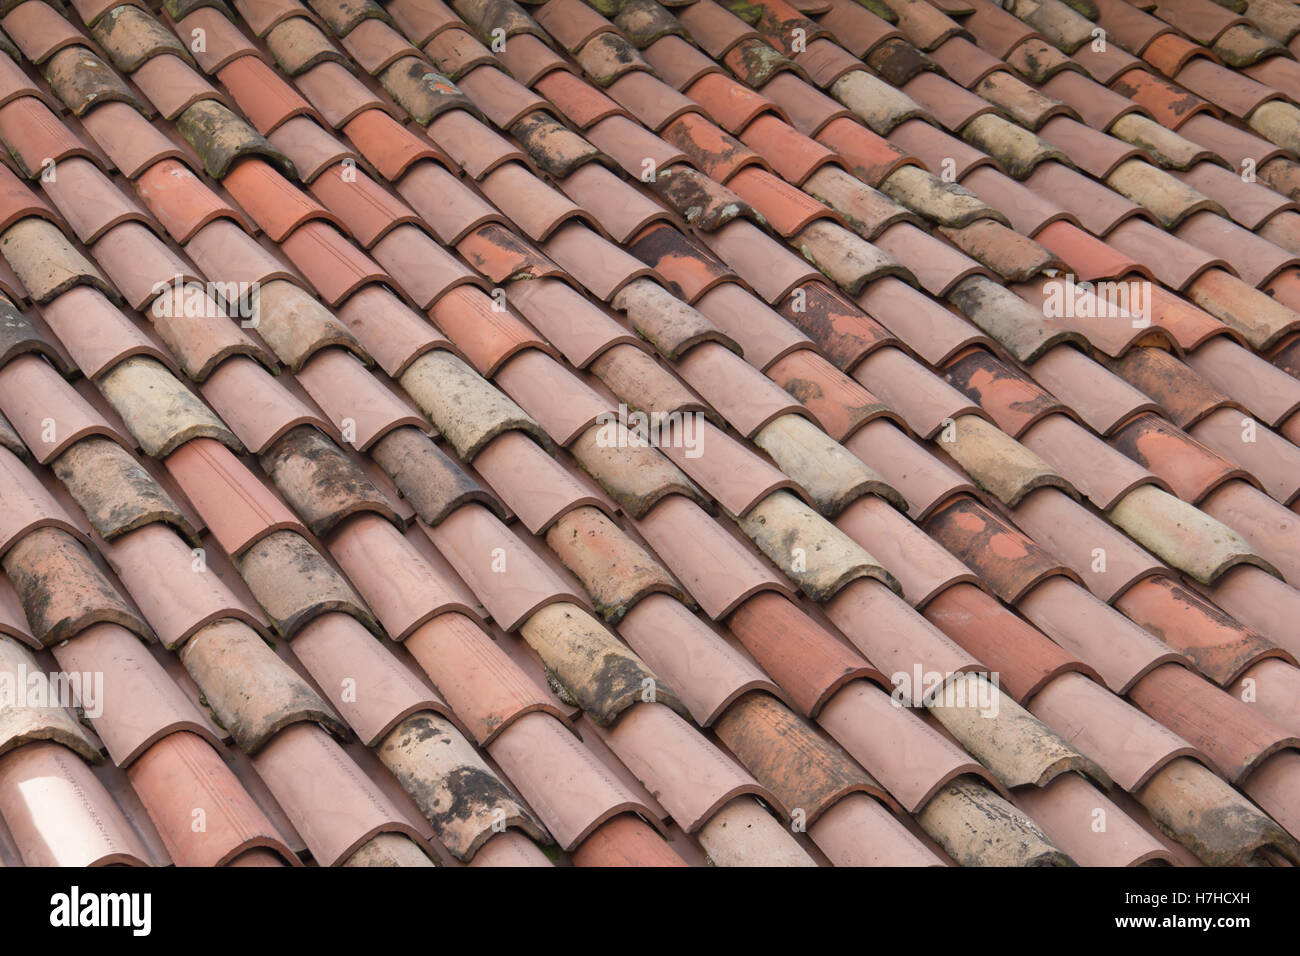 Le assicelle del tetto. Red Roof herpes zoster. Italia Foto Stock